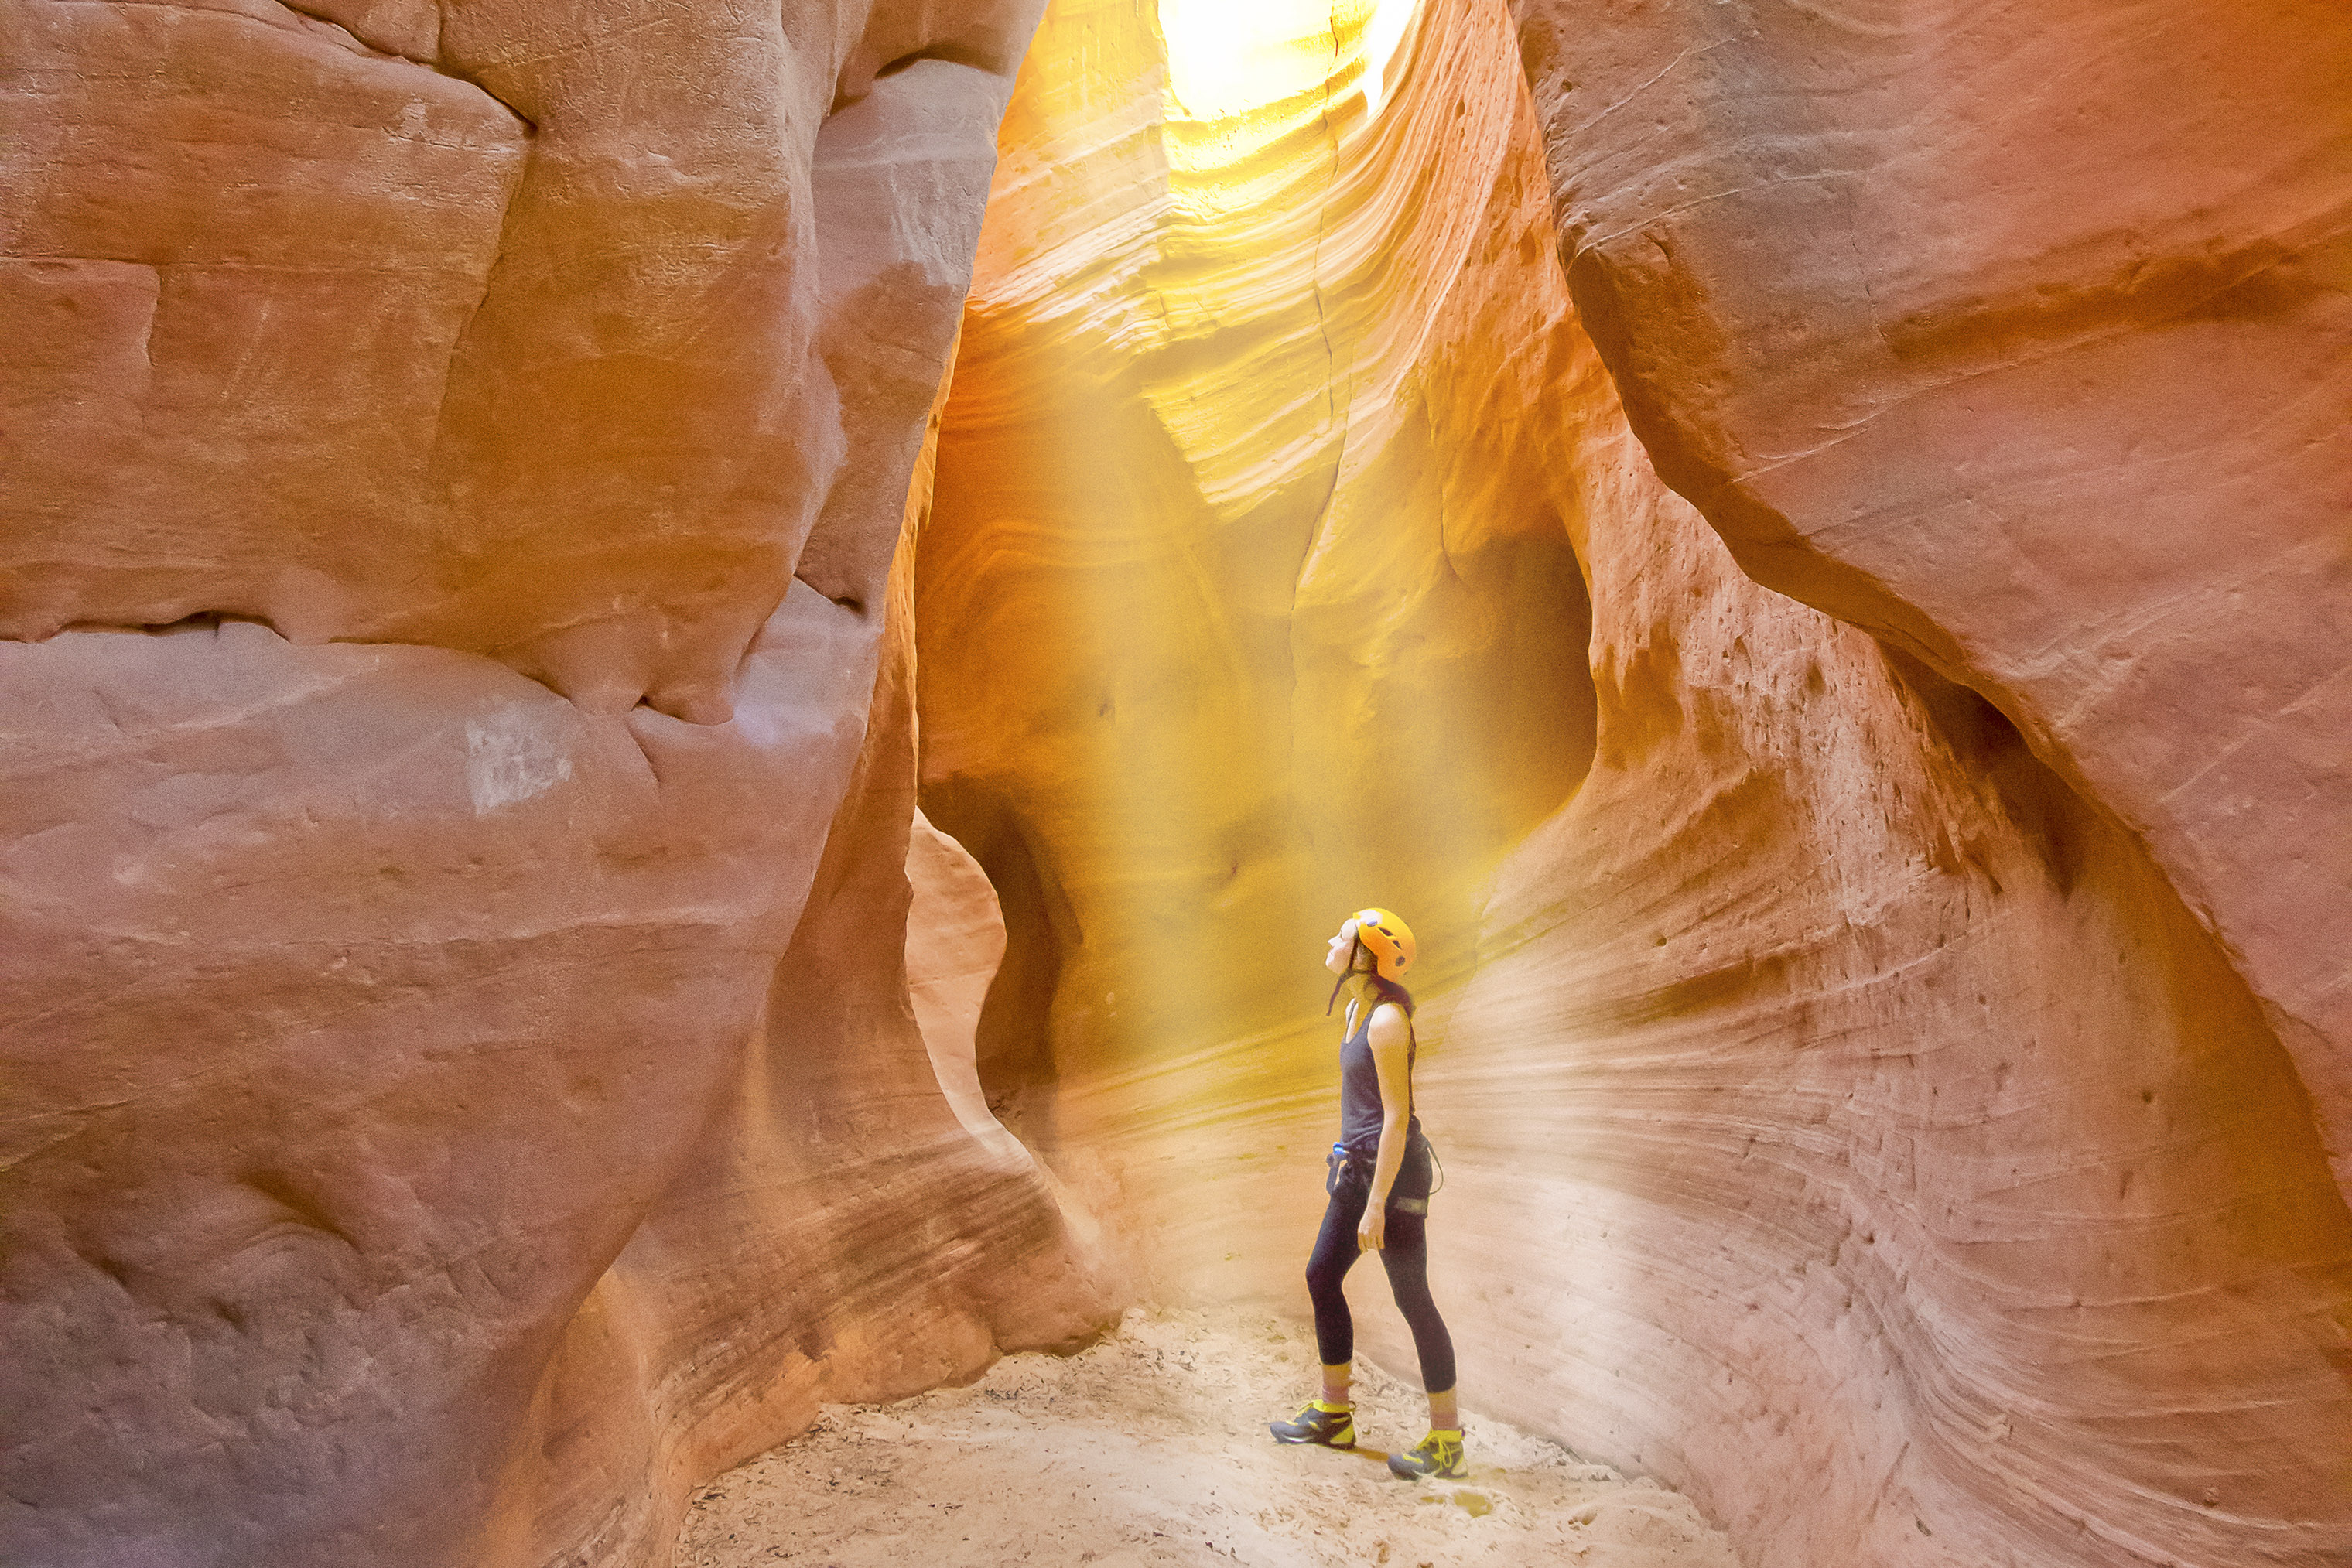 The Narrows is a popular hiking spot in Zion National Park, an hour from St. George, Utah.